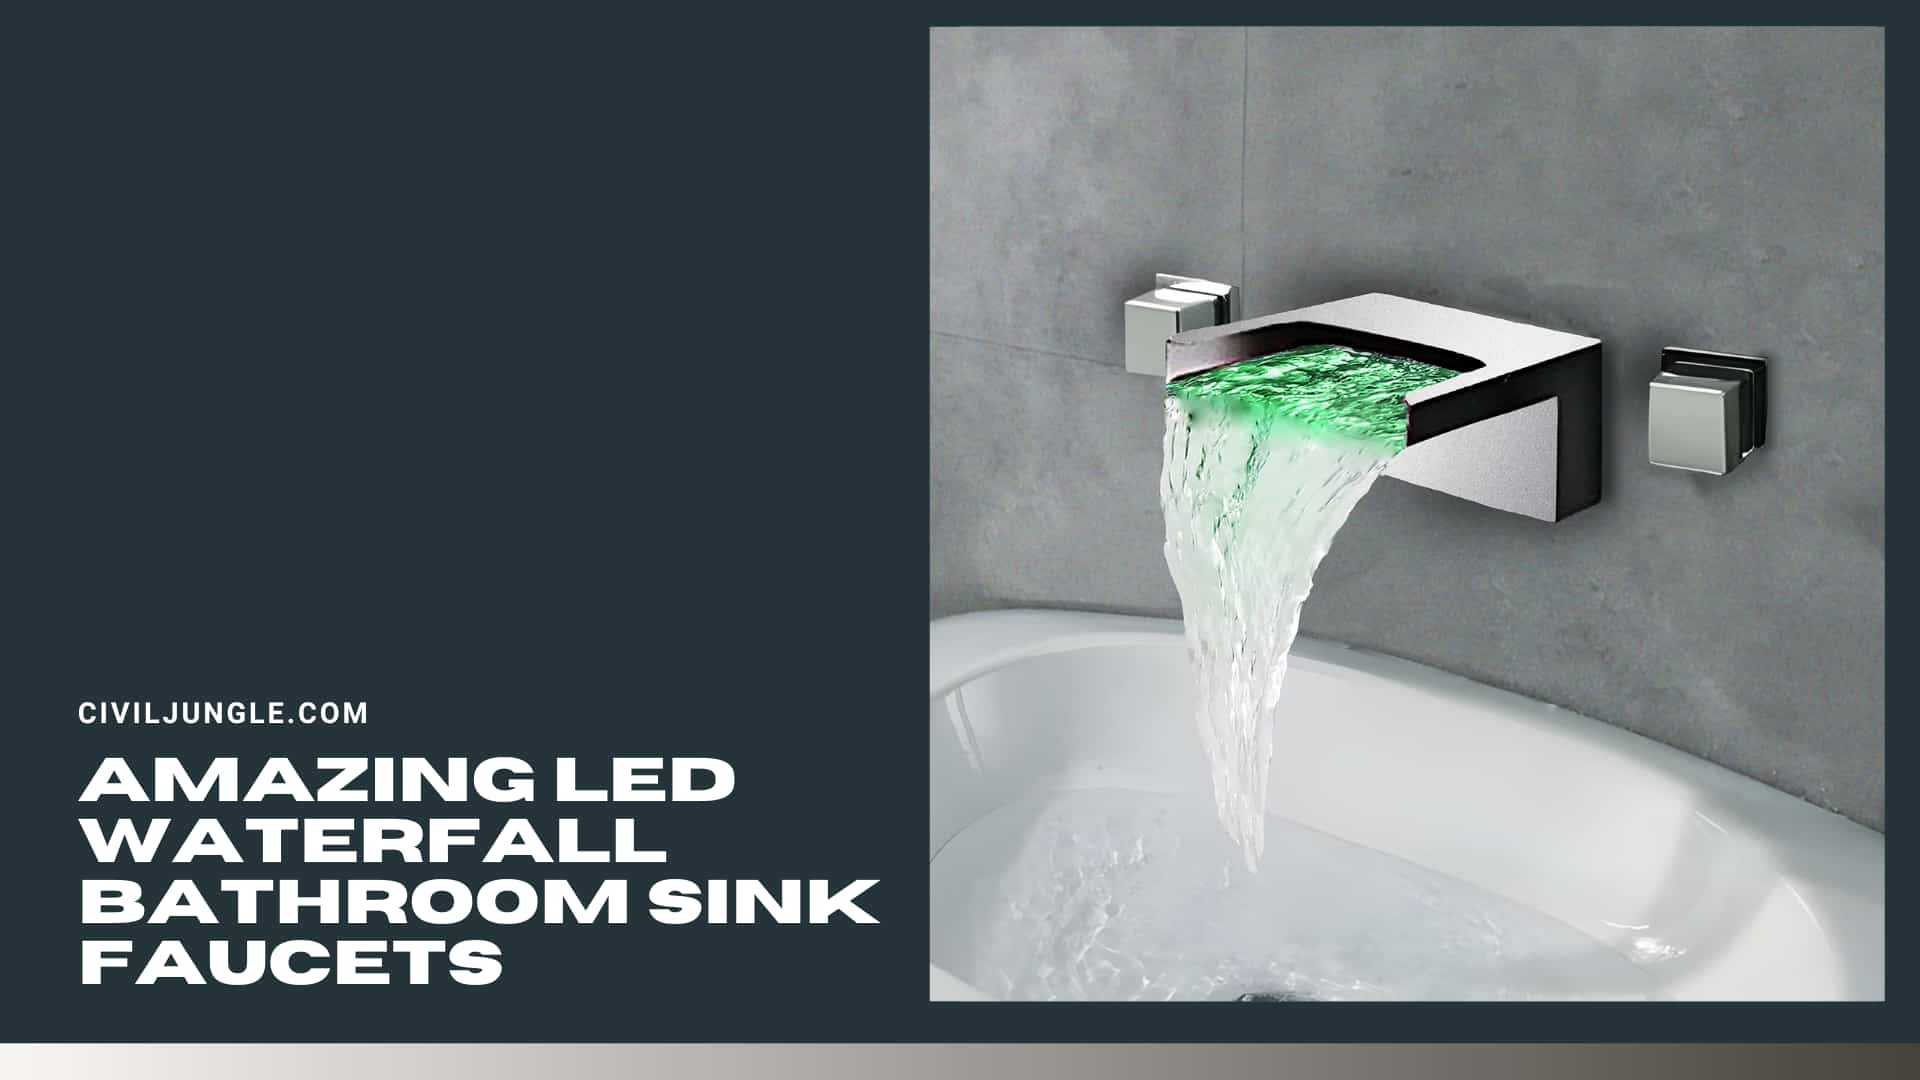 Amazing LED Waterfall Bathroom Sink Faucets